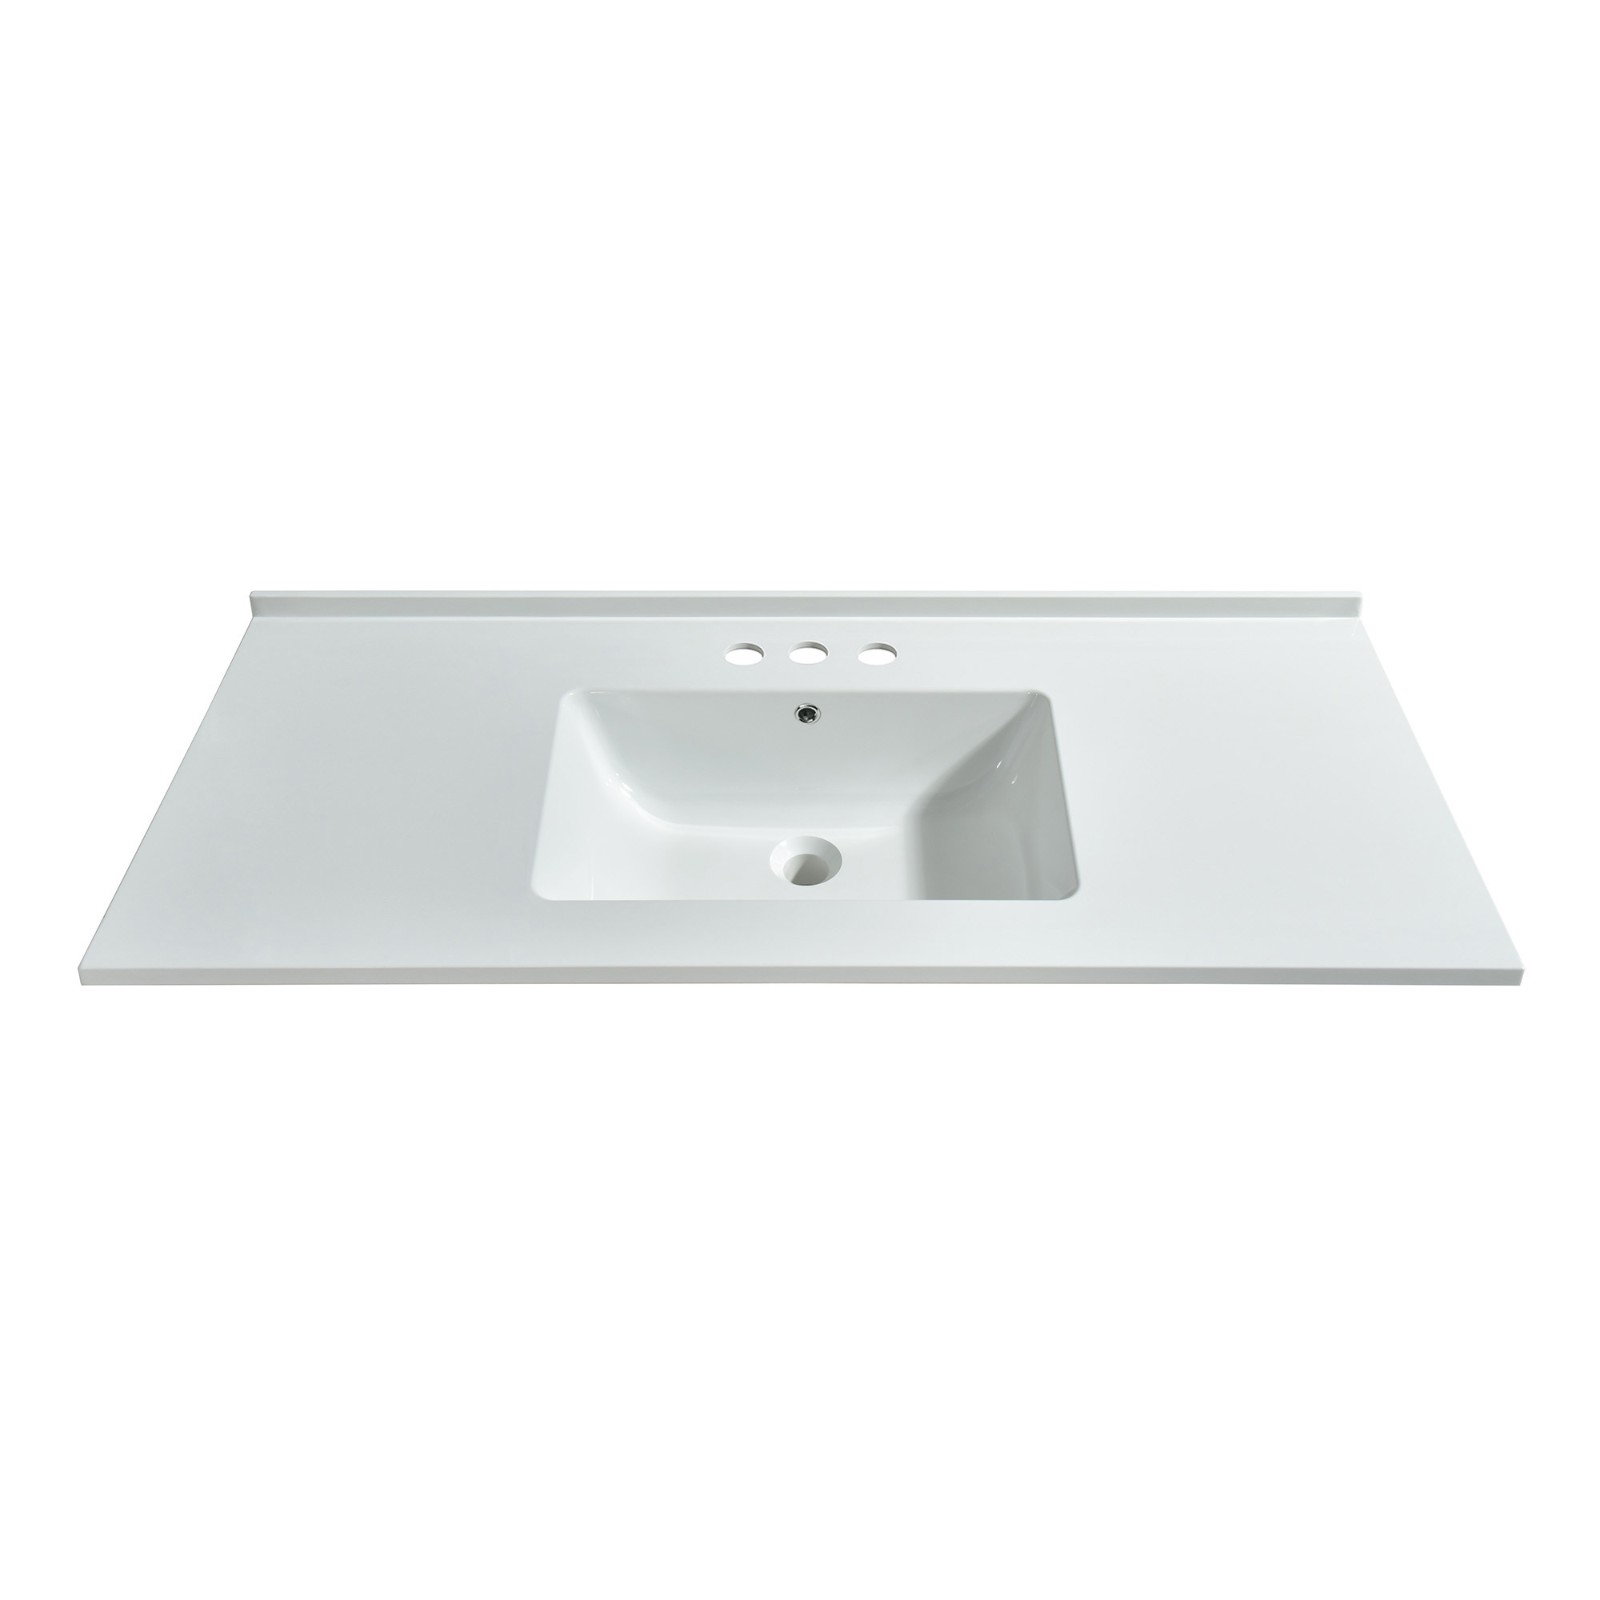  WOODBRIDGE VT4922-1008 Solid Surface Vanity Top with with Intergrated Sink and 3 Faucet Holes for 8 inch Widespread Faucet, 49